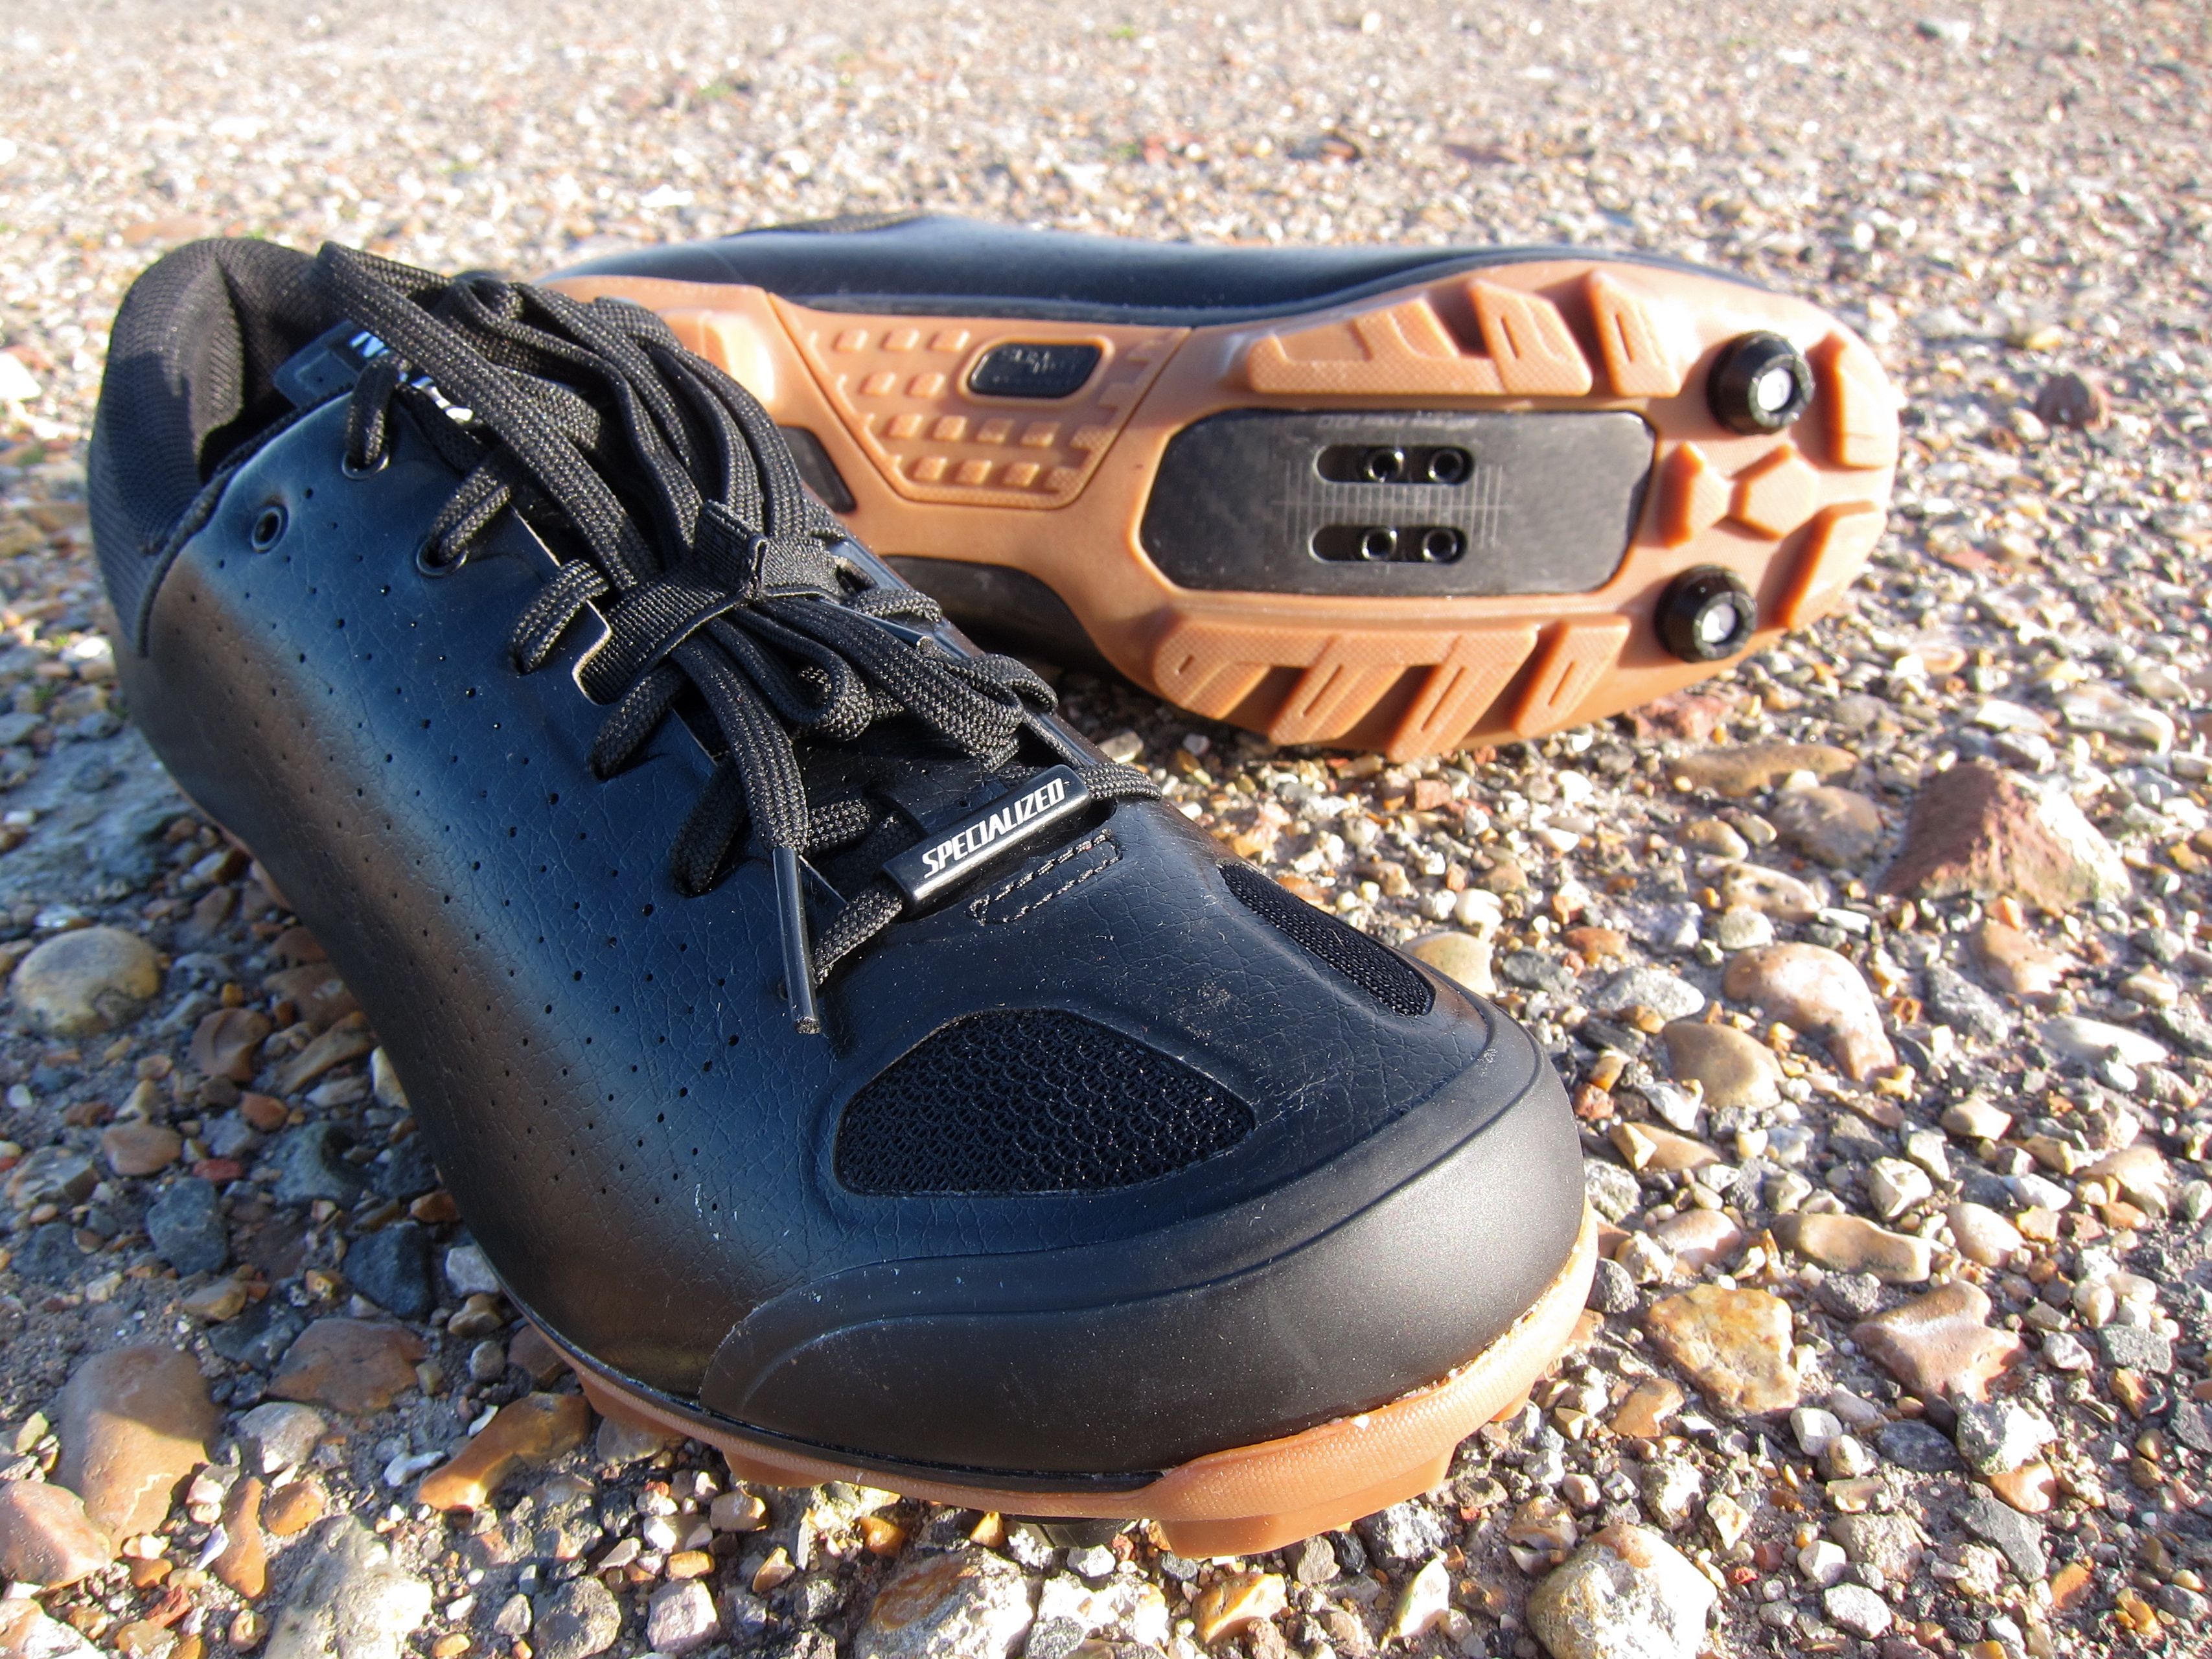 specialized-recon-mixed-terrain-shoes-pair-sole.jpg